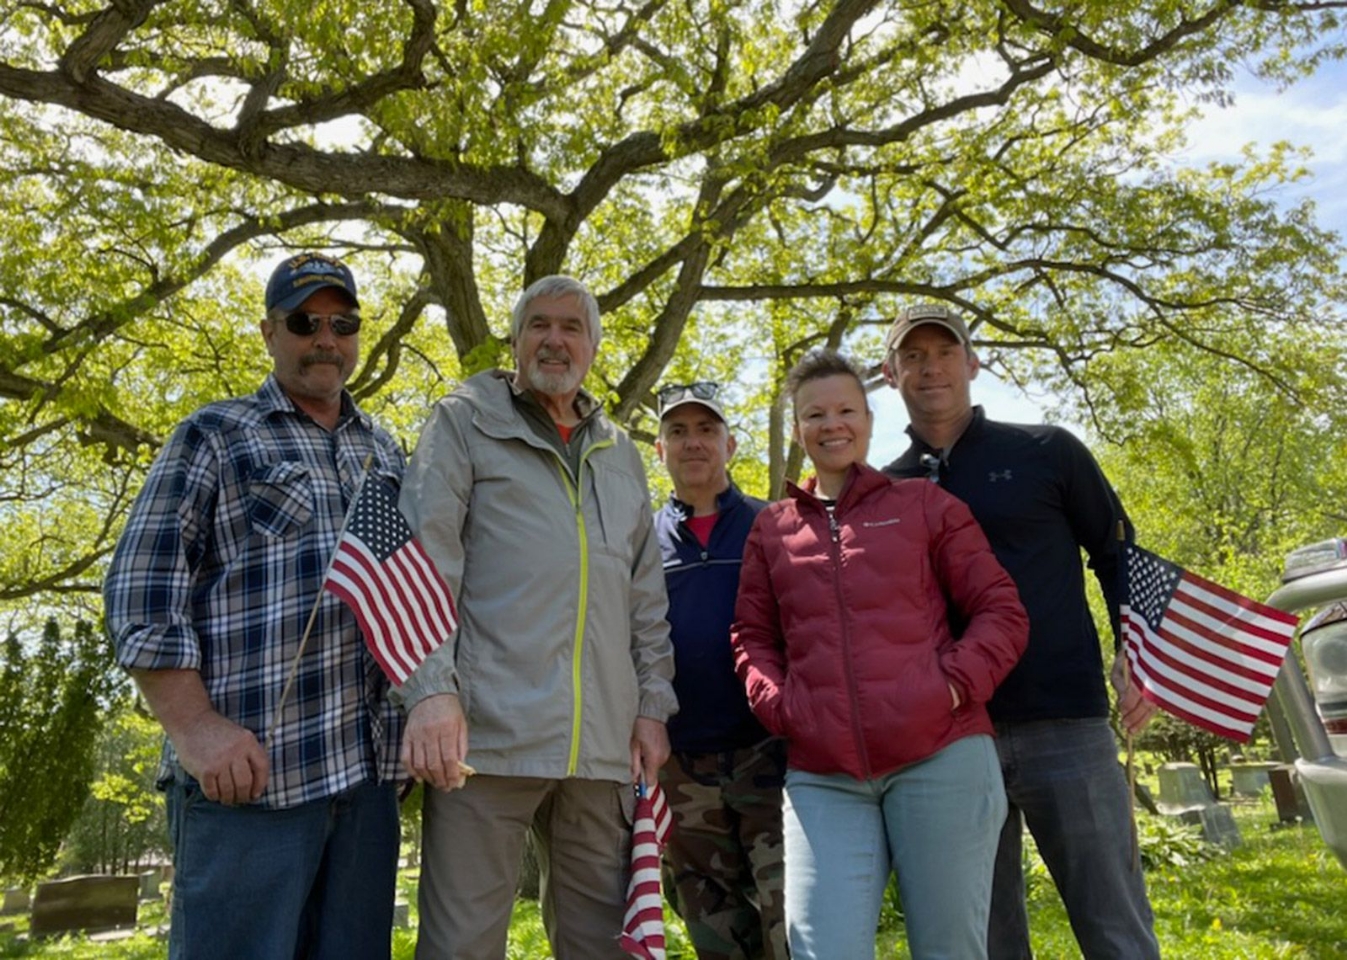 L to R: Steve Eisenhauer, Bill Austin, John Hahn, Elizabeth Harman, and Andy Lochner - places flags on the graves for Memorial Day